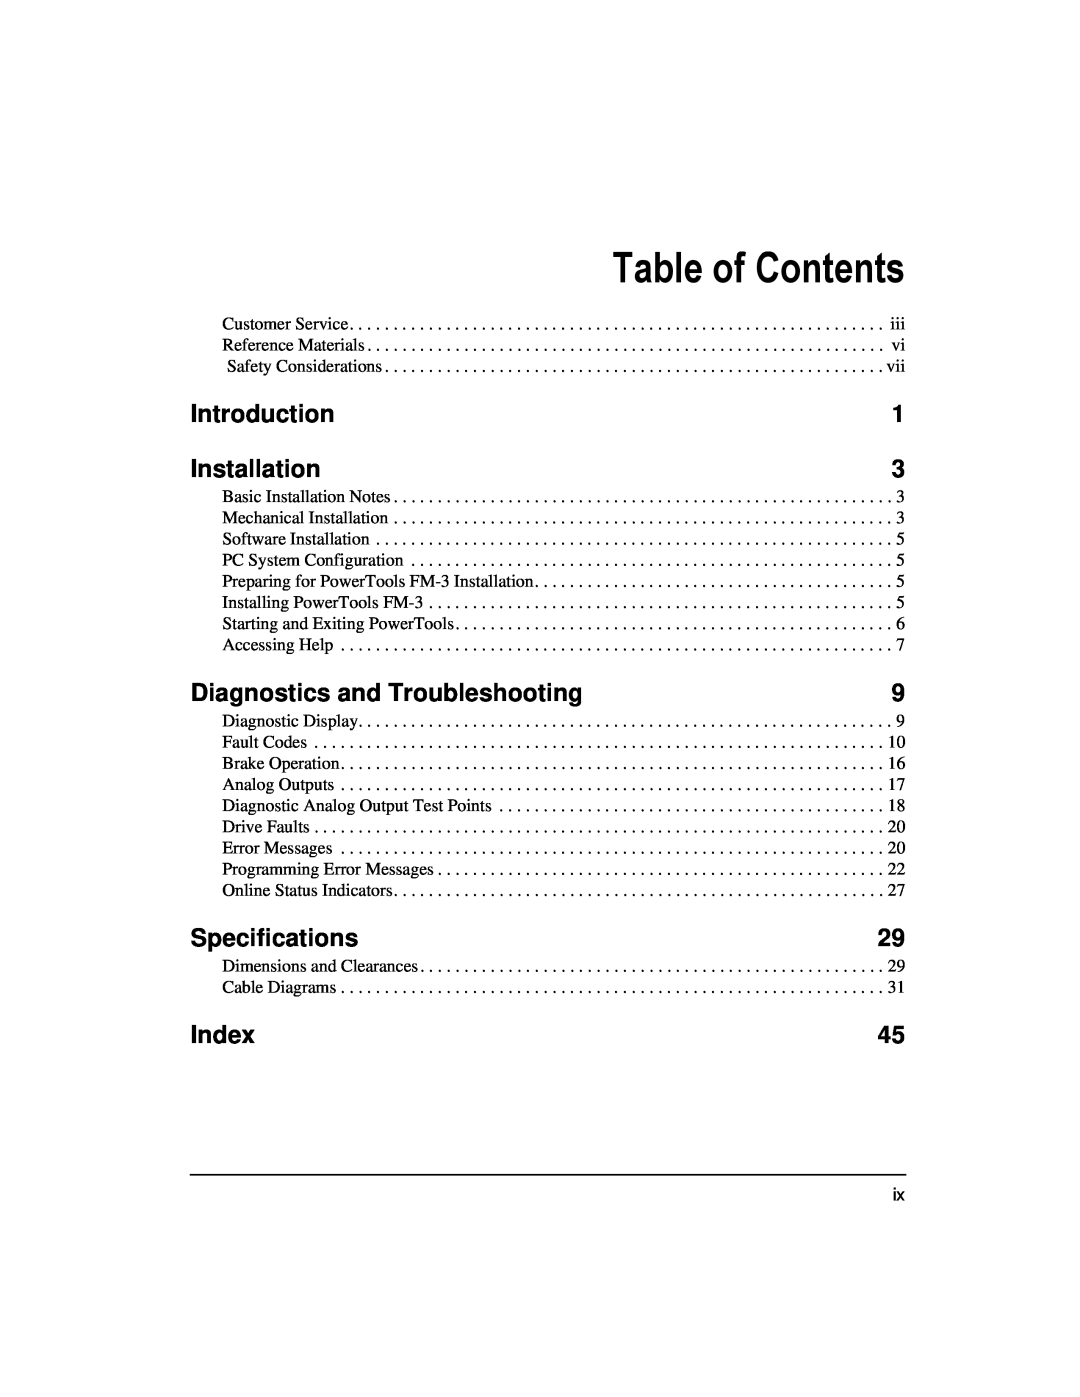 Emerson 400508-02 Table of Contents, Introduction, Installation, Diagnostics and Troubleshooting, Specifications, Index 